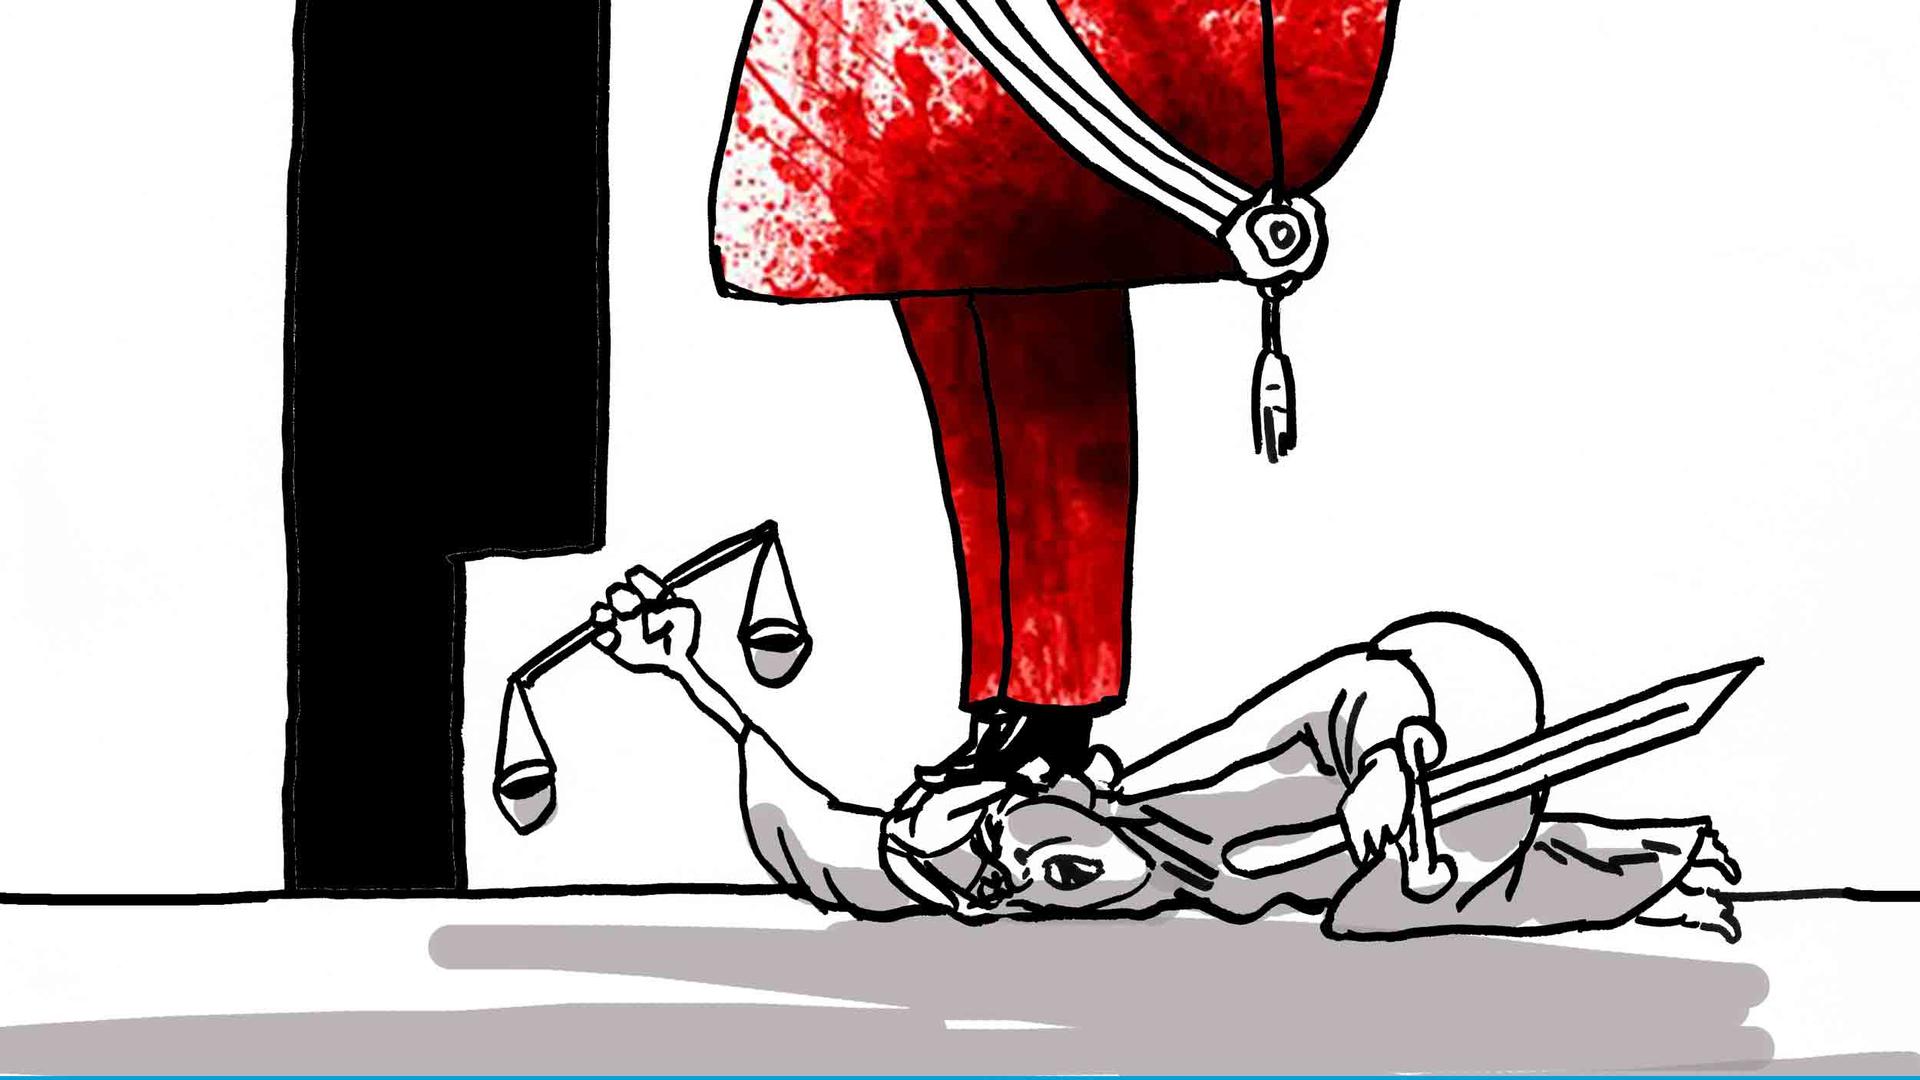 Justice holds her scales while someone stands ontop of her in this political cartoon